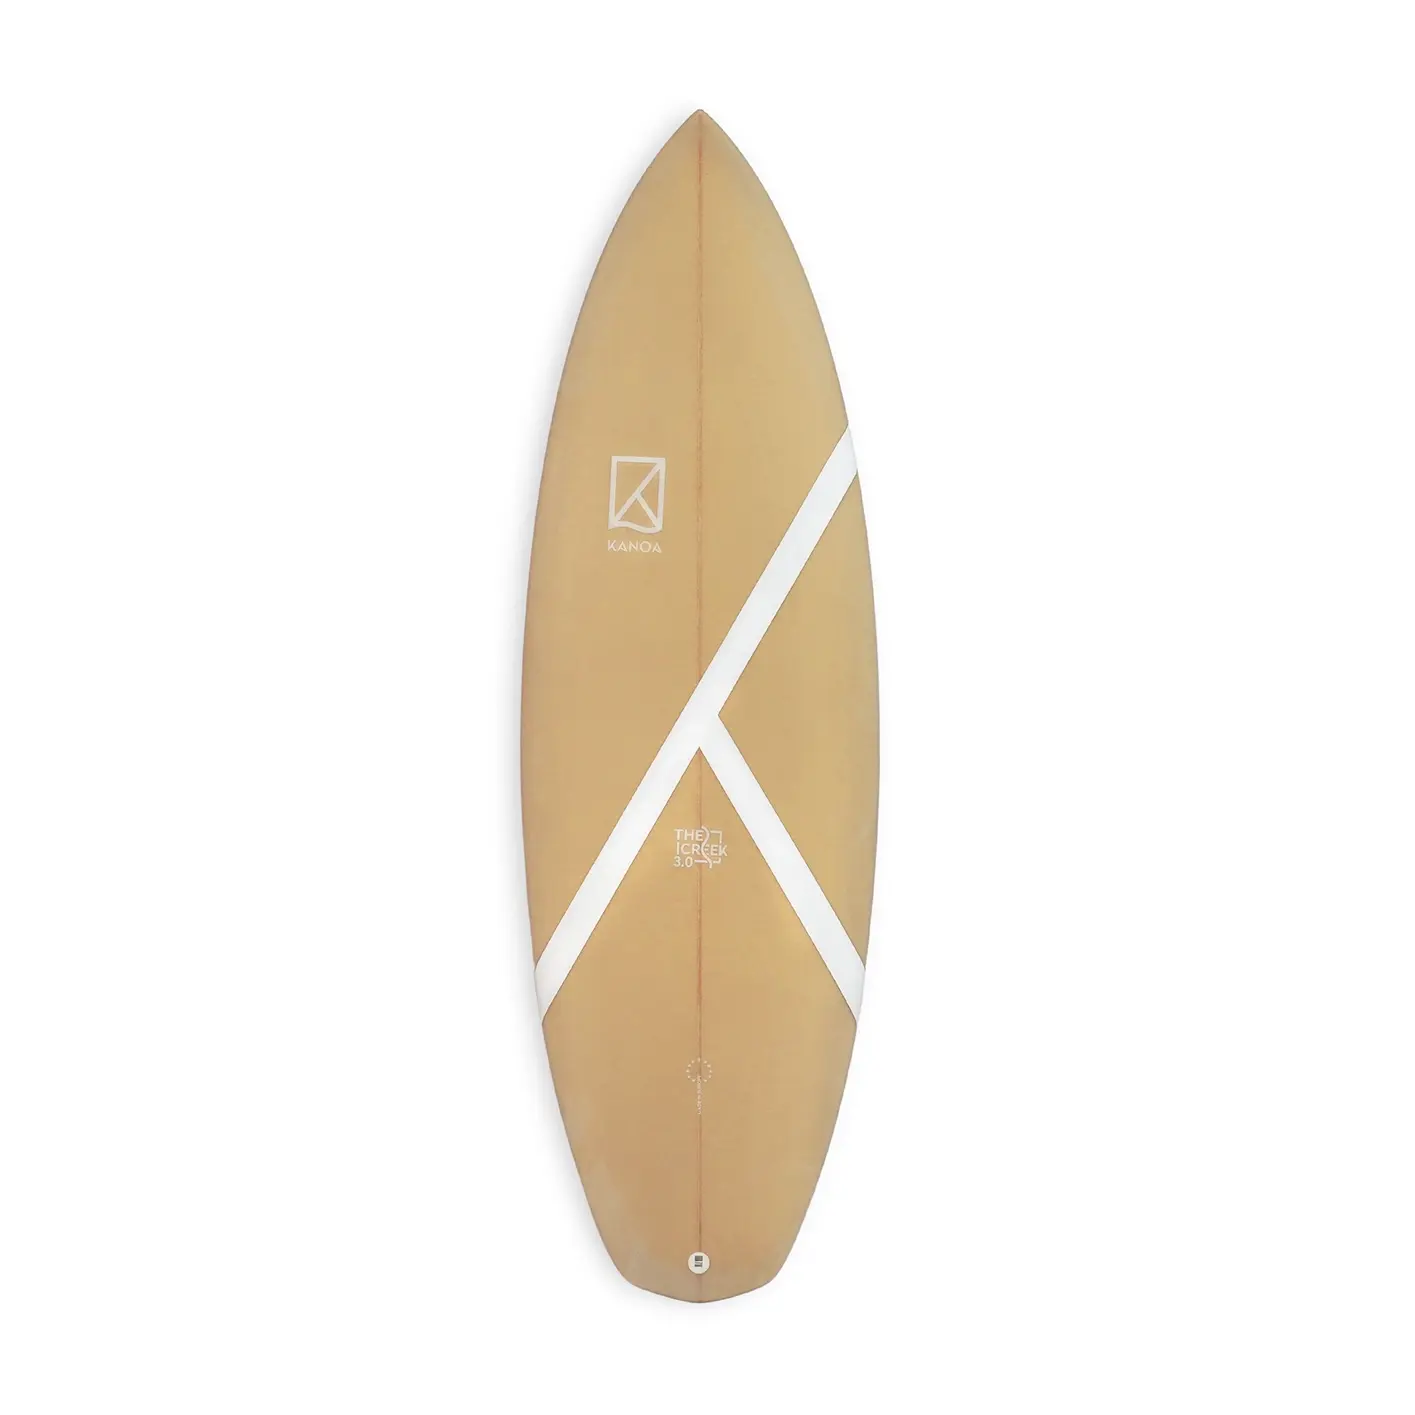 Discover our Creek 3.0 Performance Riverboard Surfboard with sustainable and durable construction 